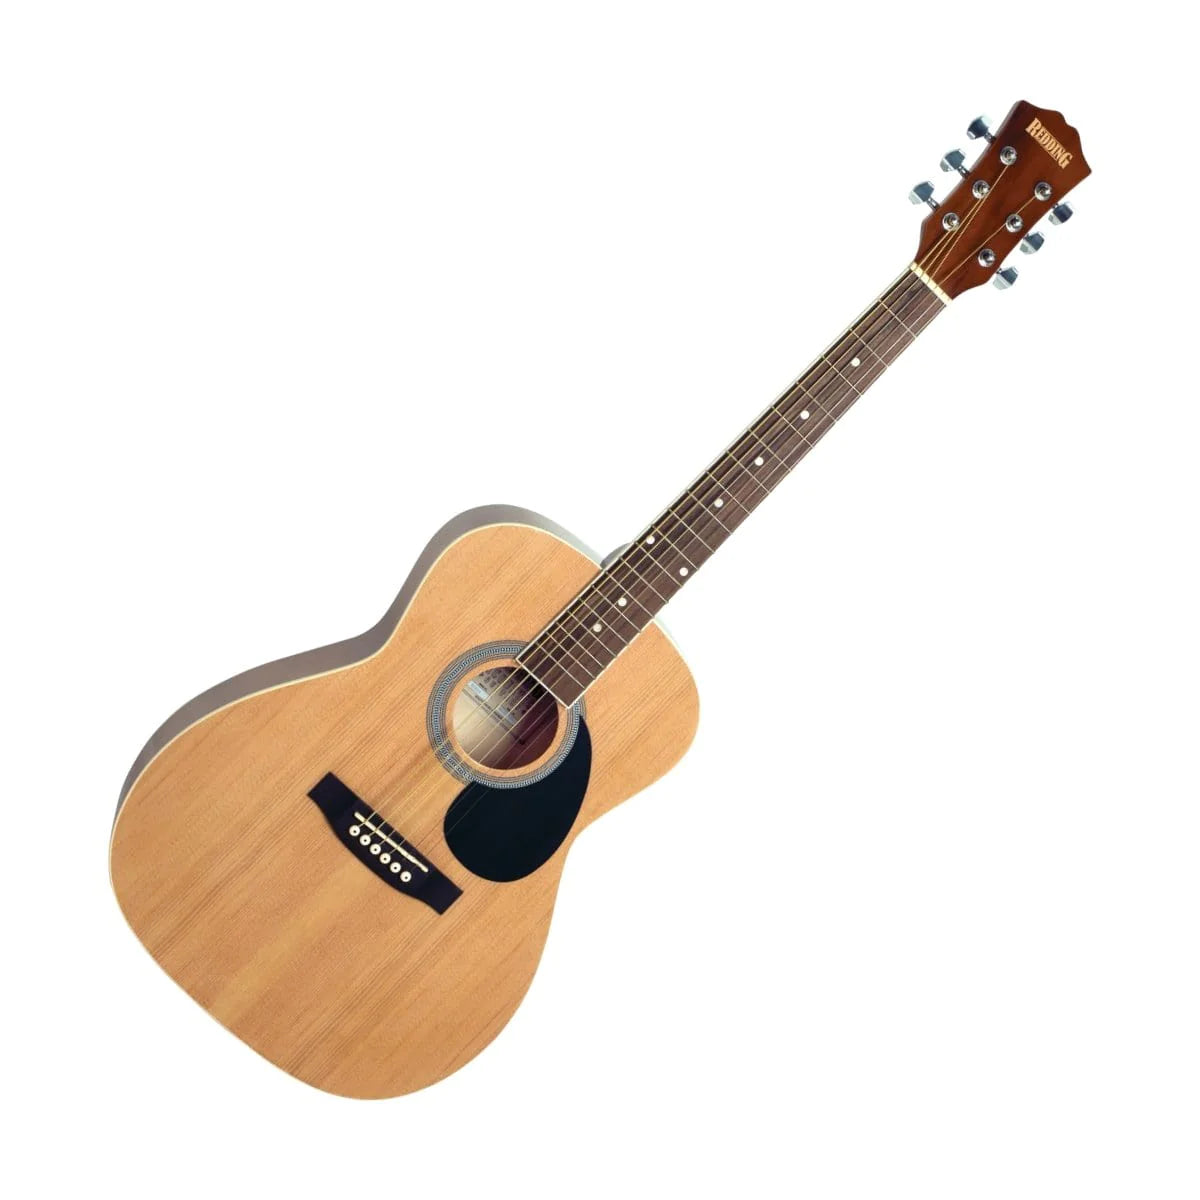 Redding 3/4 Size Dreadnought Steel String Acoustic Guitar - RED34 - Natural